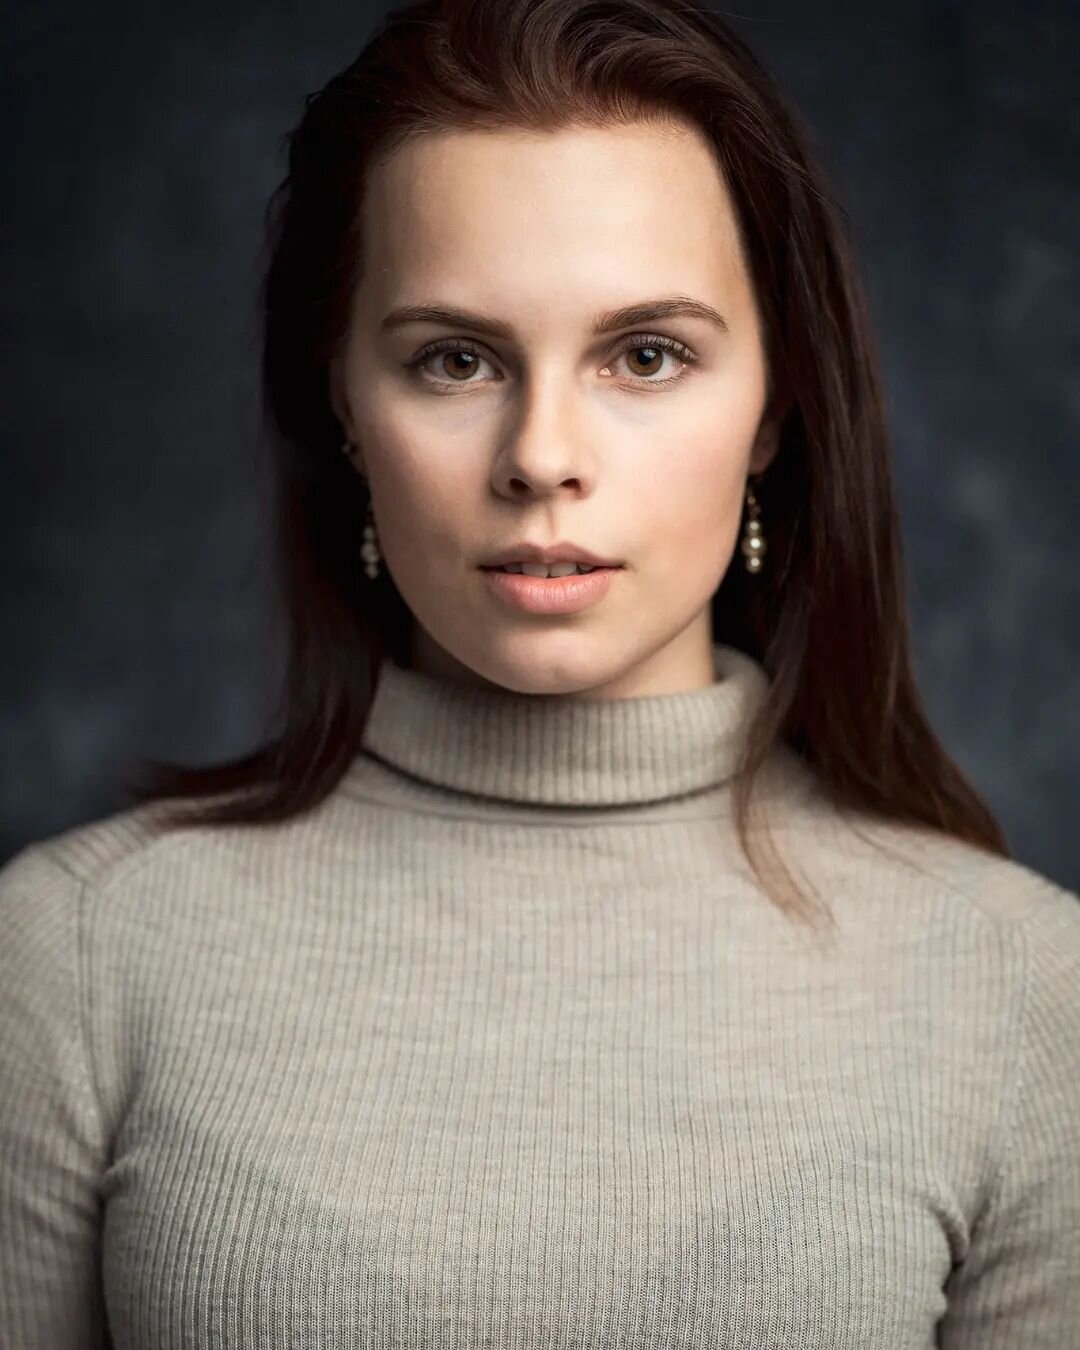 Name: Carola Hakola
Playing age: 17-23

Carola is an actress from Tampere, Finland. She started acting in Kangasalan Pikkuteatteri when she was 6 years old.

Carola went to Tampereen yhteiskoulun lukio, which is known as a high school of performing a